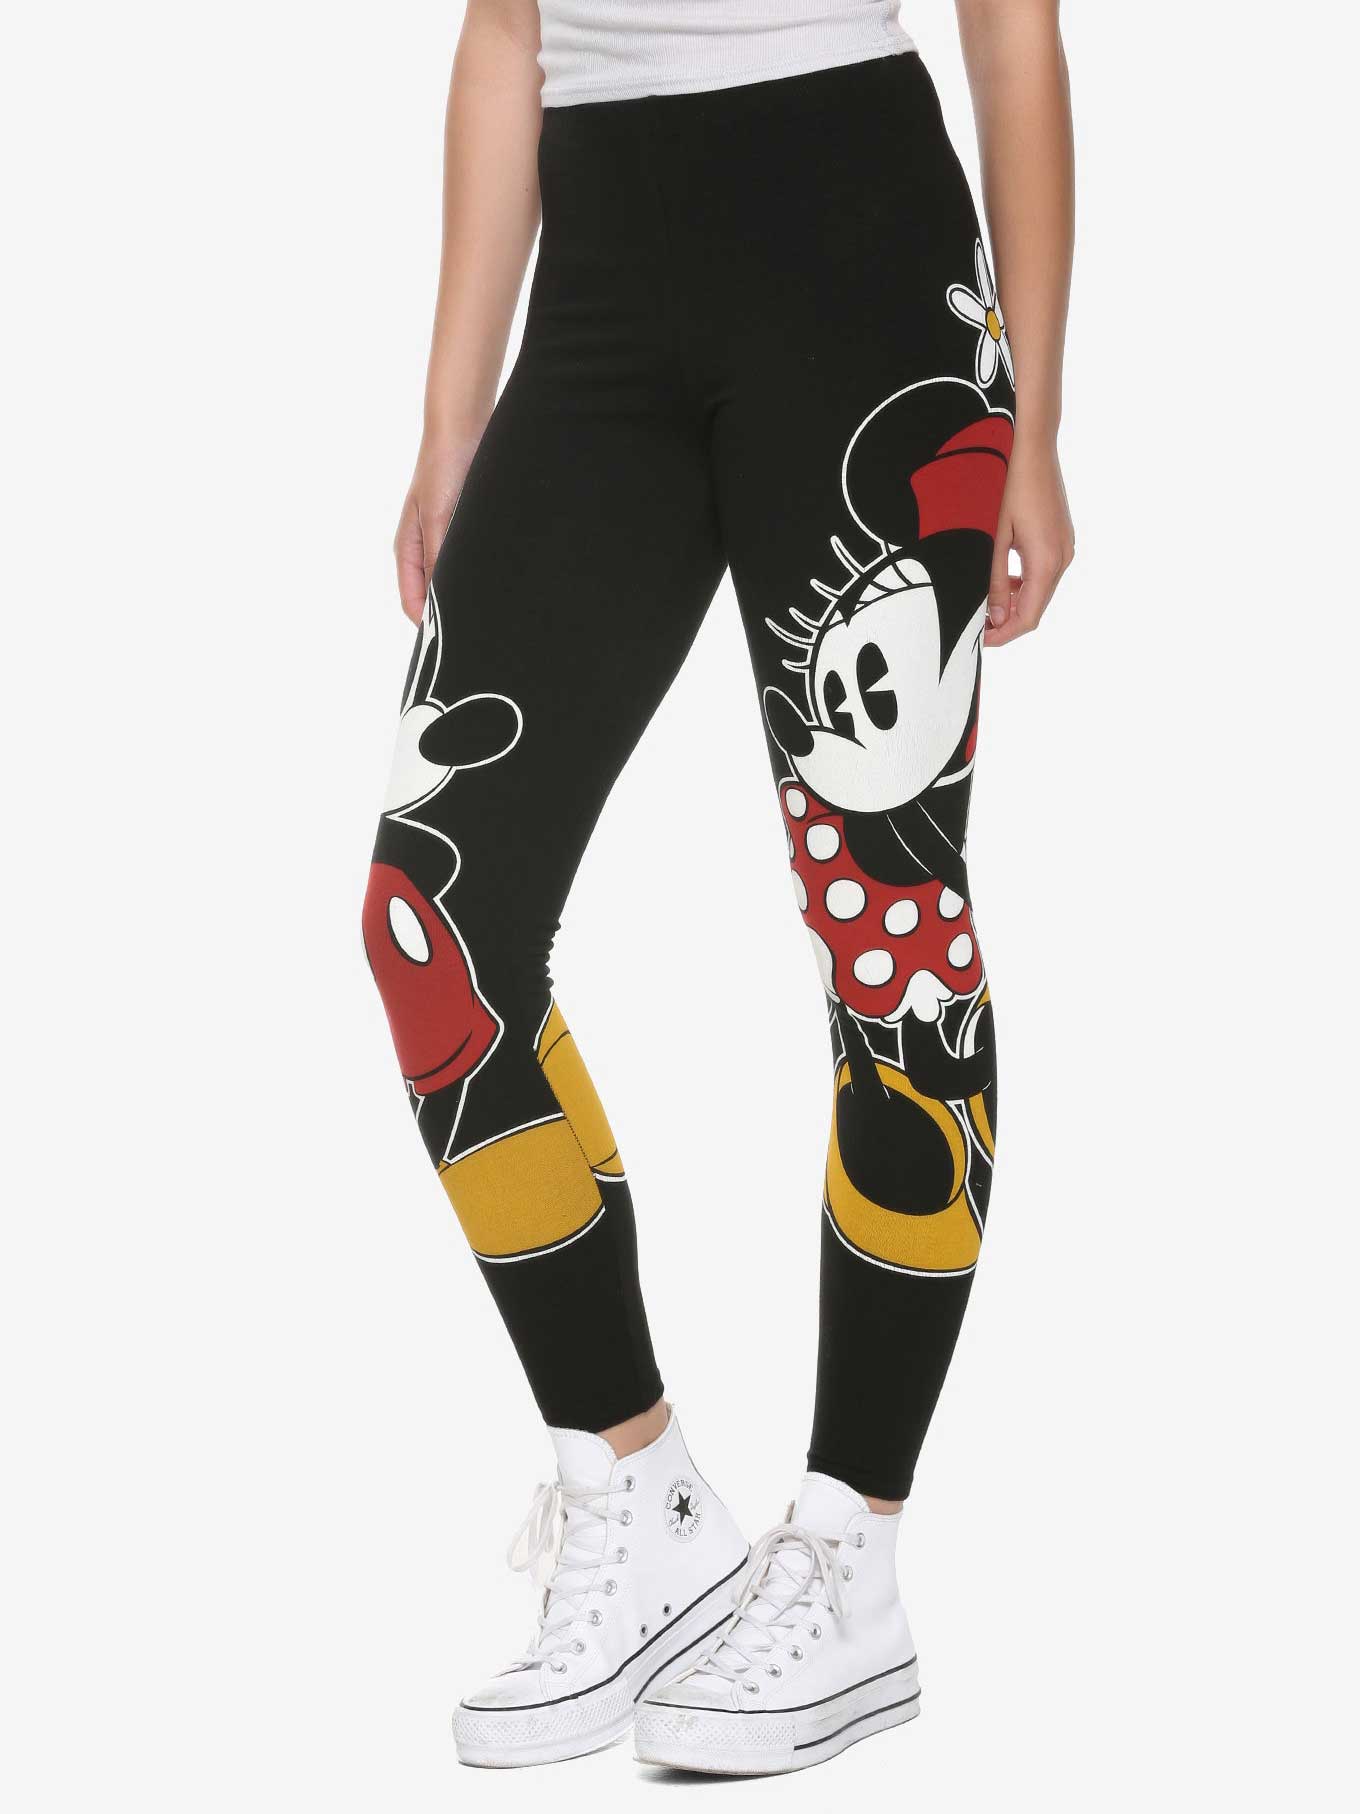 Mickey and Minnie Athletic Pants